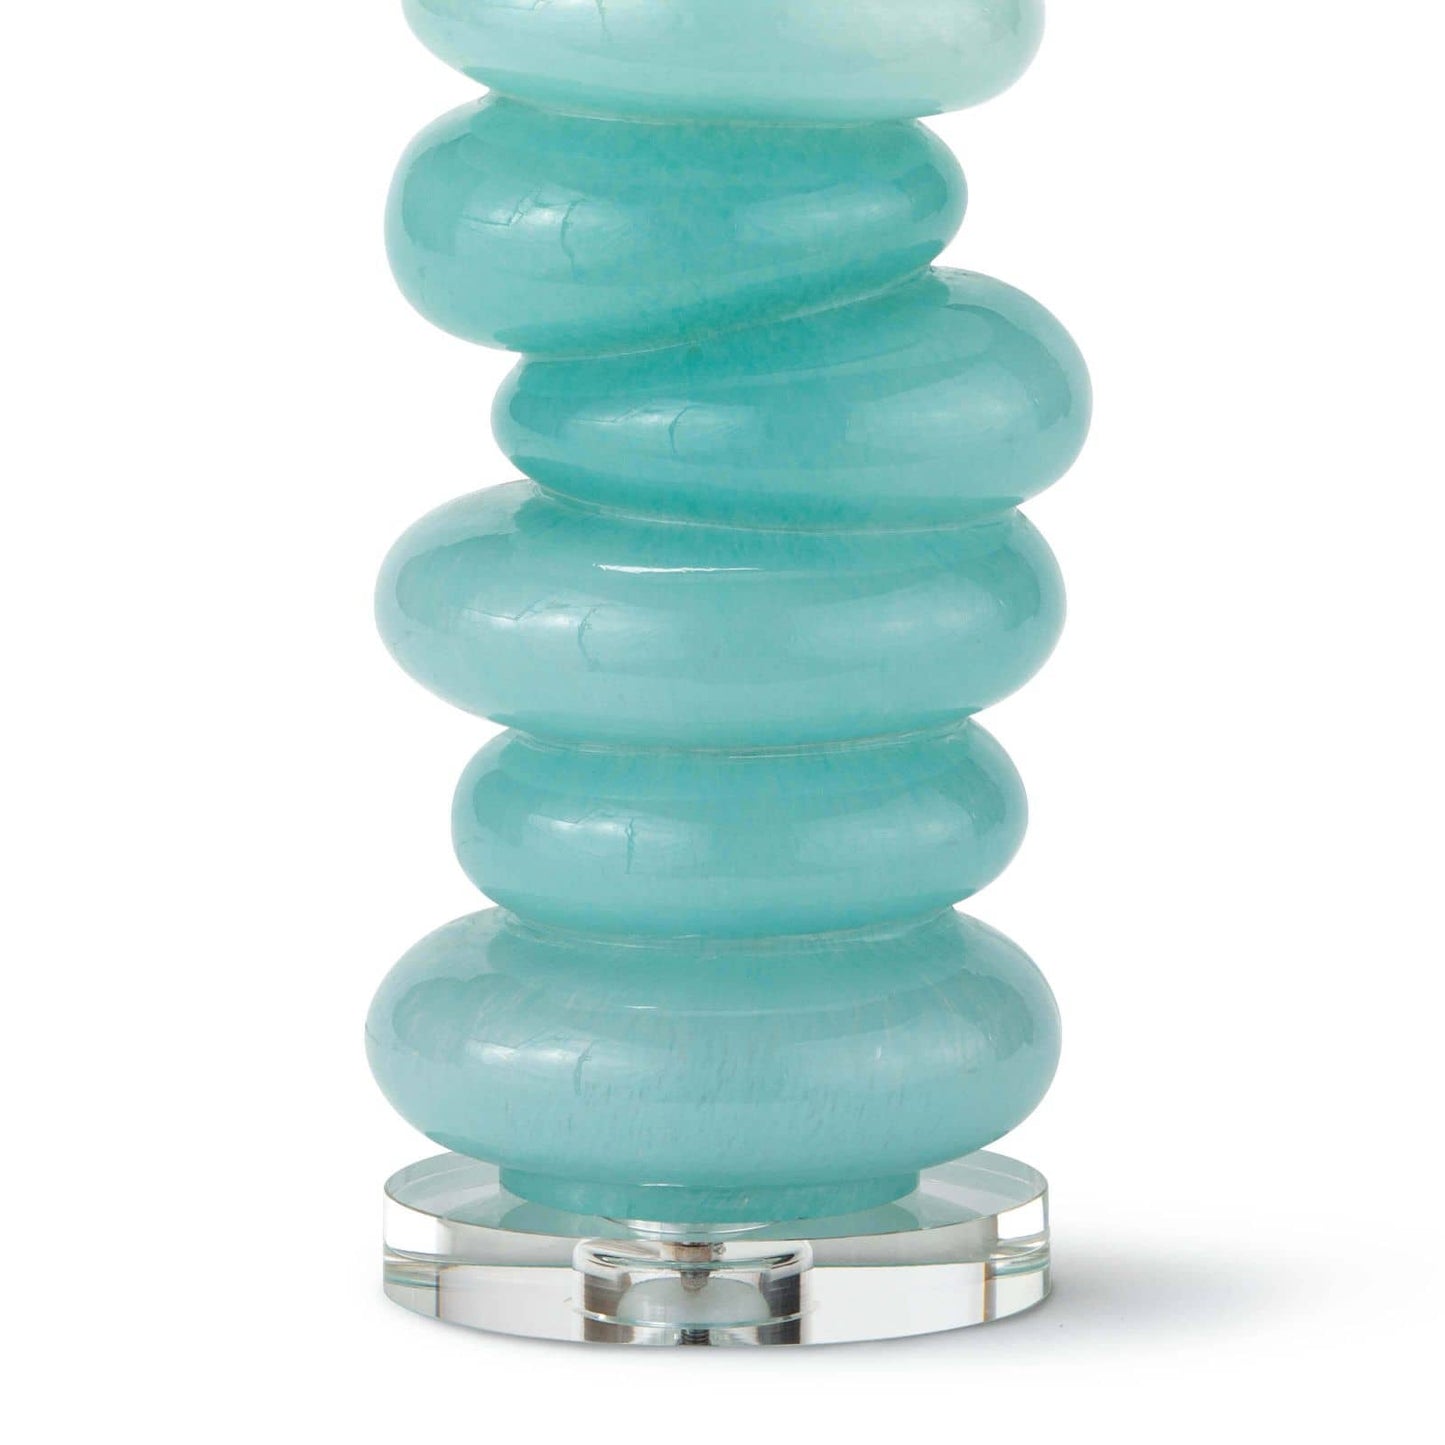 Stacked Pebble Glass Table Lamp in Aqua by Regina Andrew